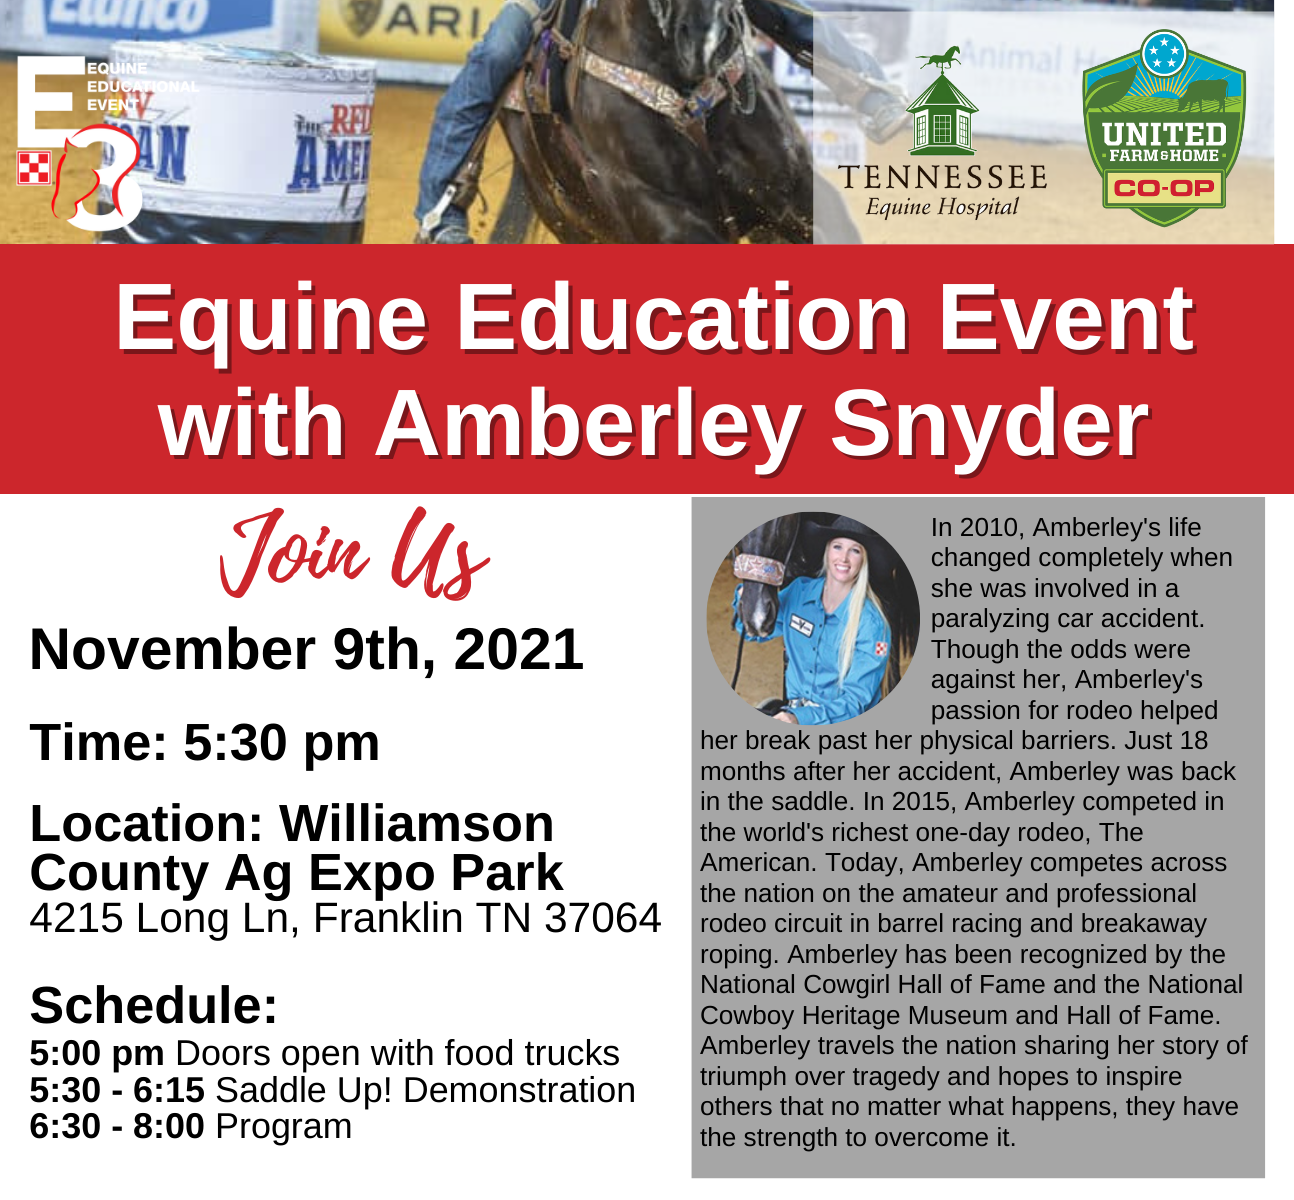 https://williamson.tennessee.edu/wp-content/uploads/sites/82/2021/09/United-Equine-Event-Flyer-FINAL-updated-1-1294x1200.png